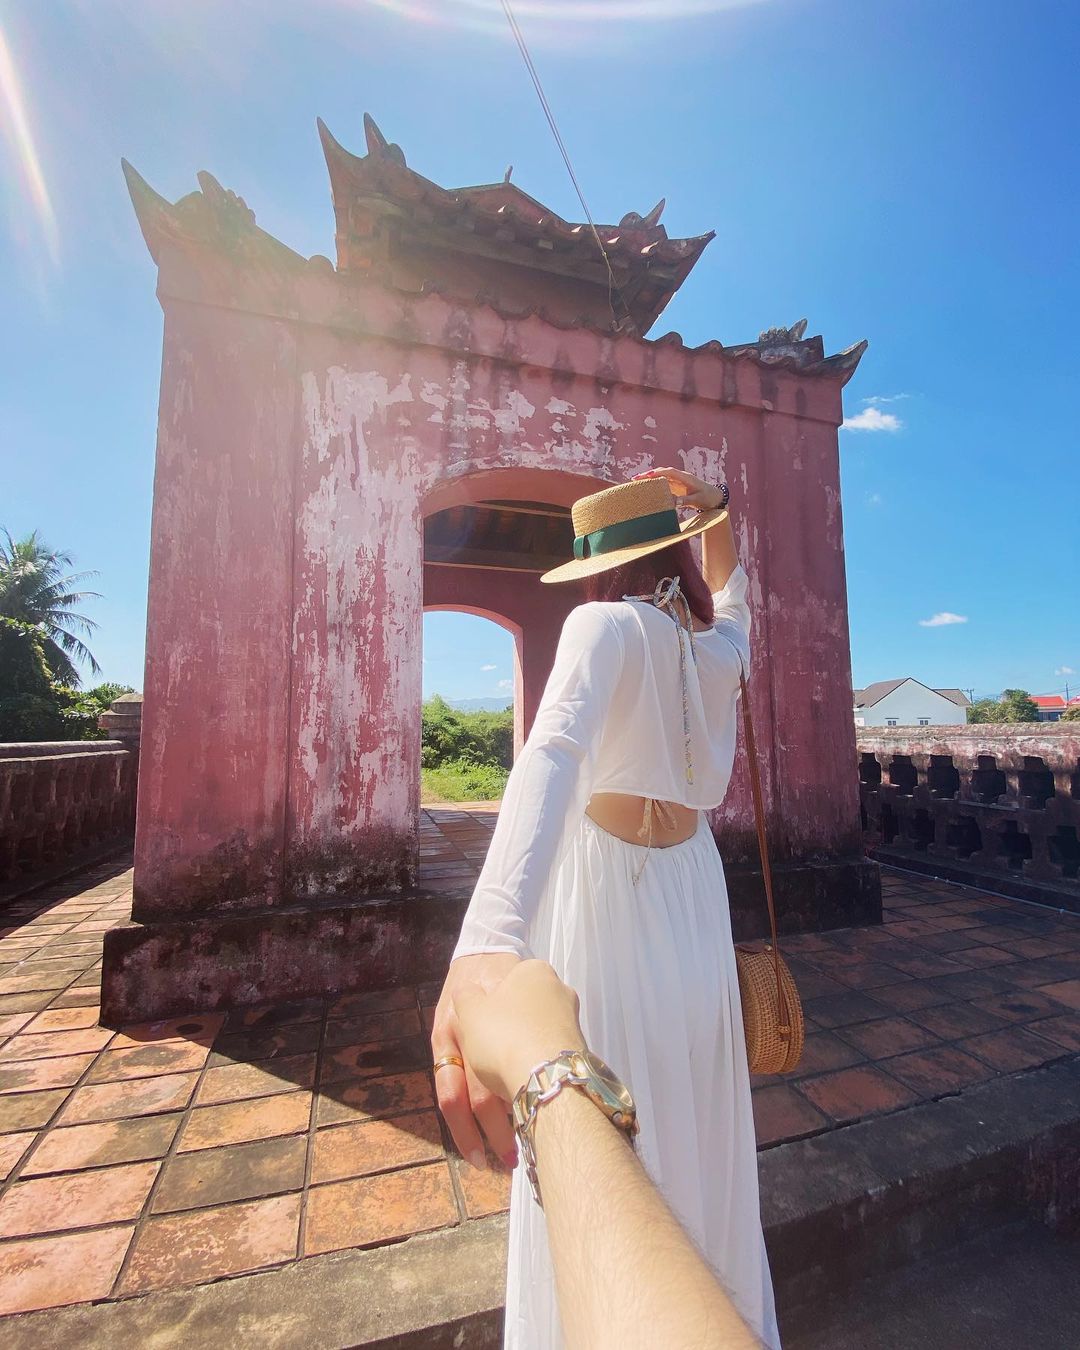 If you want to be awed, youve come to the right place - Dien Khanh Citadel Nha Trang